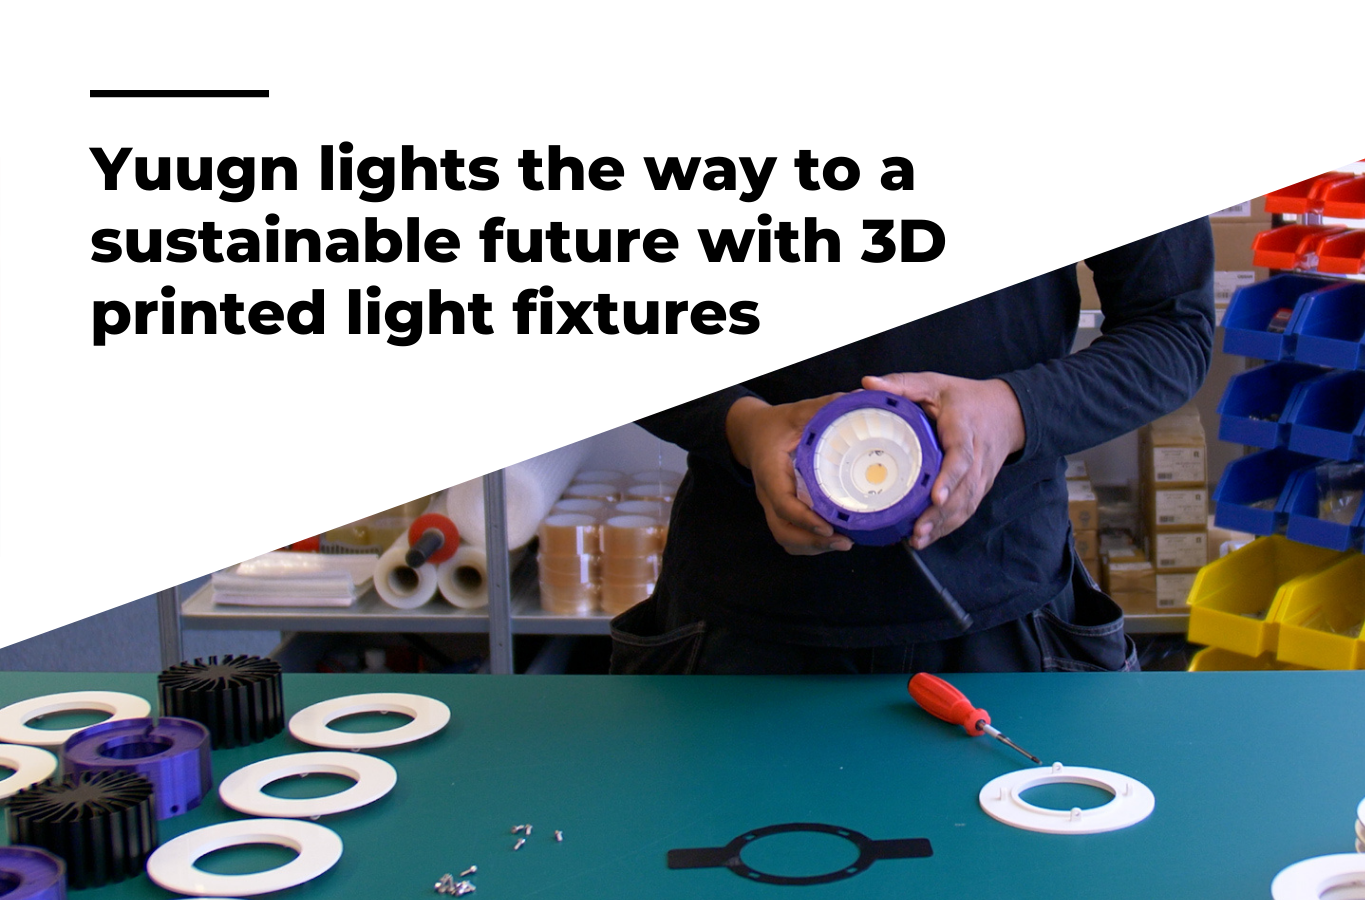 Yuugn lights the way to a sustainable future with 3D printed light fixtures